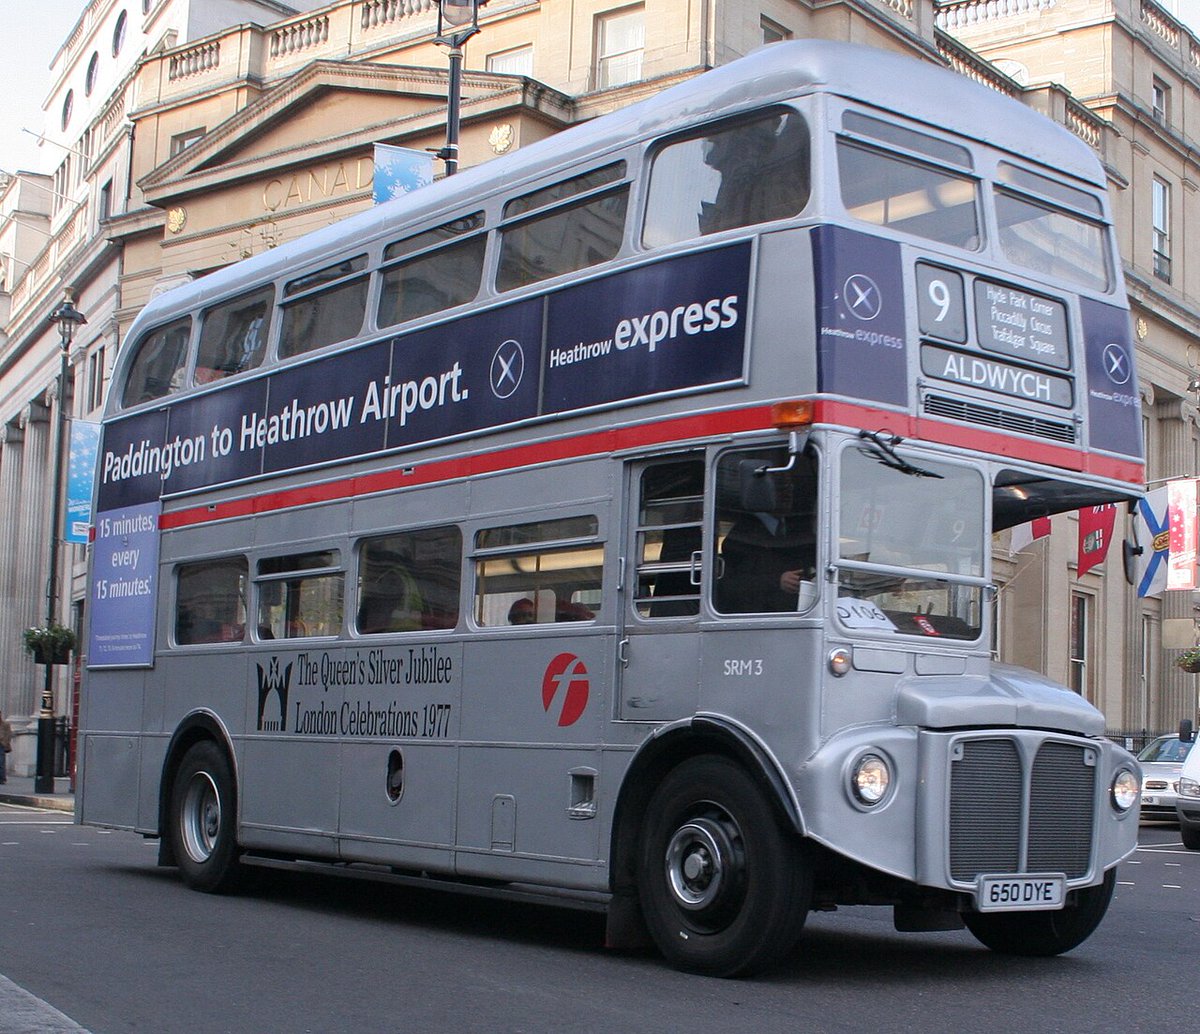 #onthisday 11 April 1977 – London Transport's Silver Jubilee AEC Routemaster buses are launched.

#britishhistory #silverjubilee #londonbus